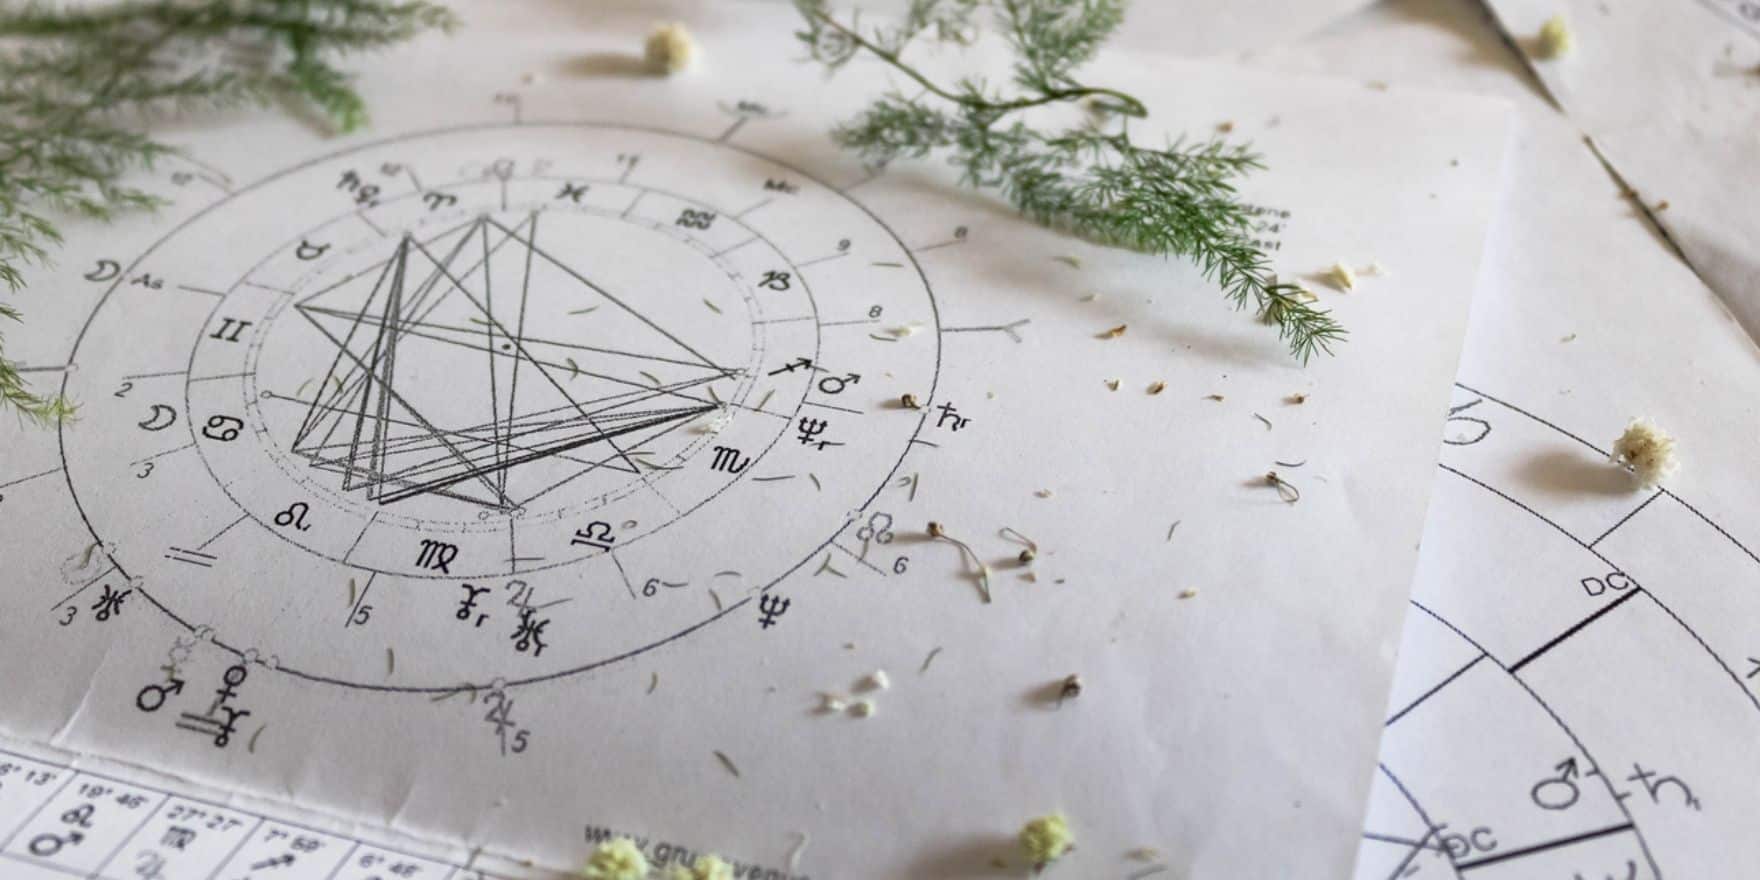 a hand-drawn astrological chart with herbs